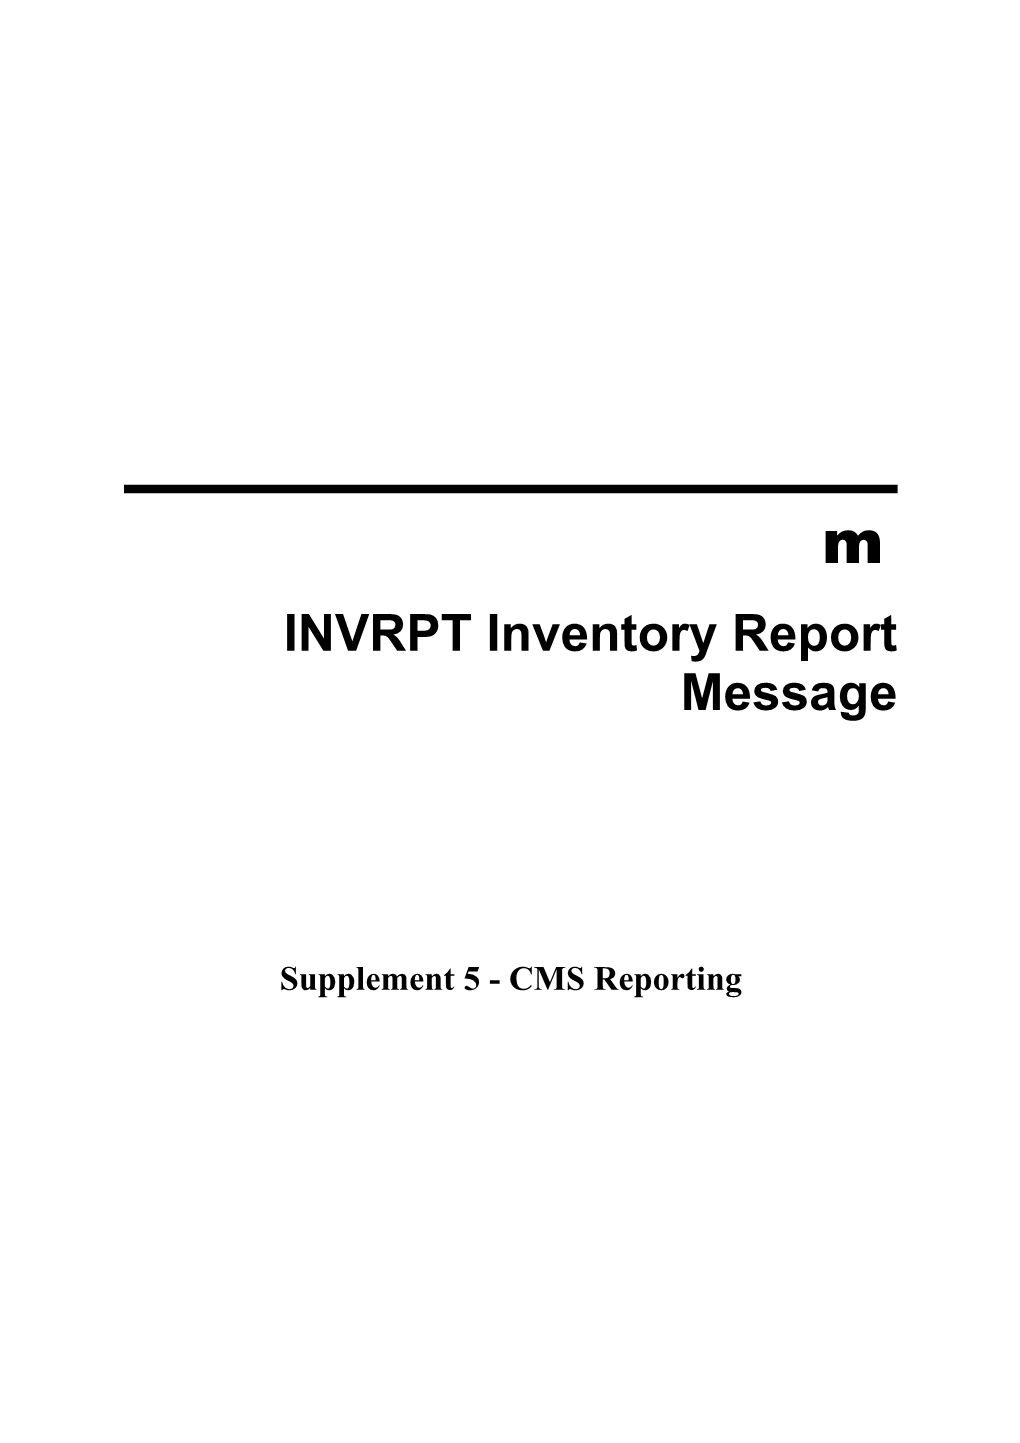 INVRPT Inventory Report Message